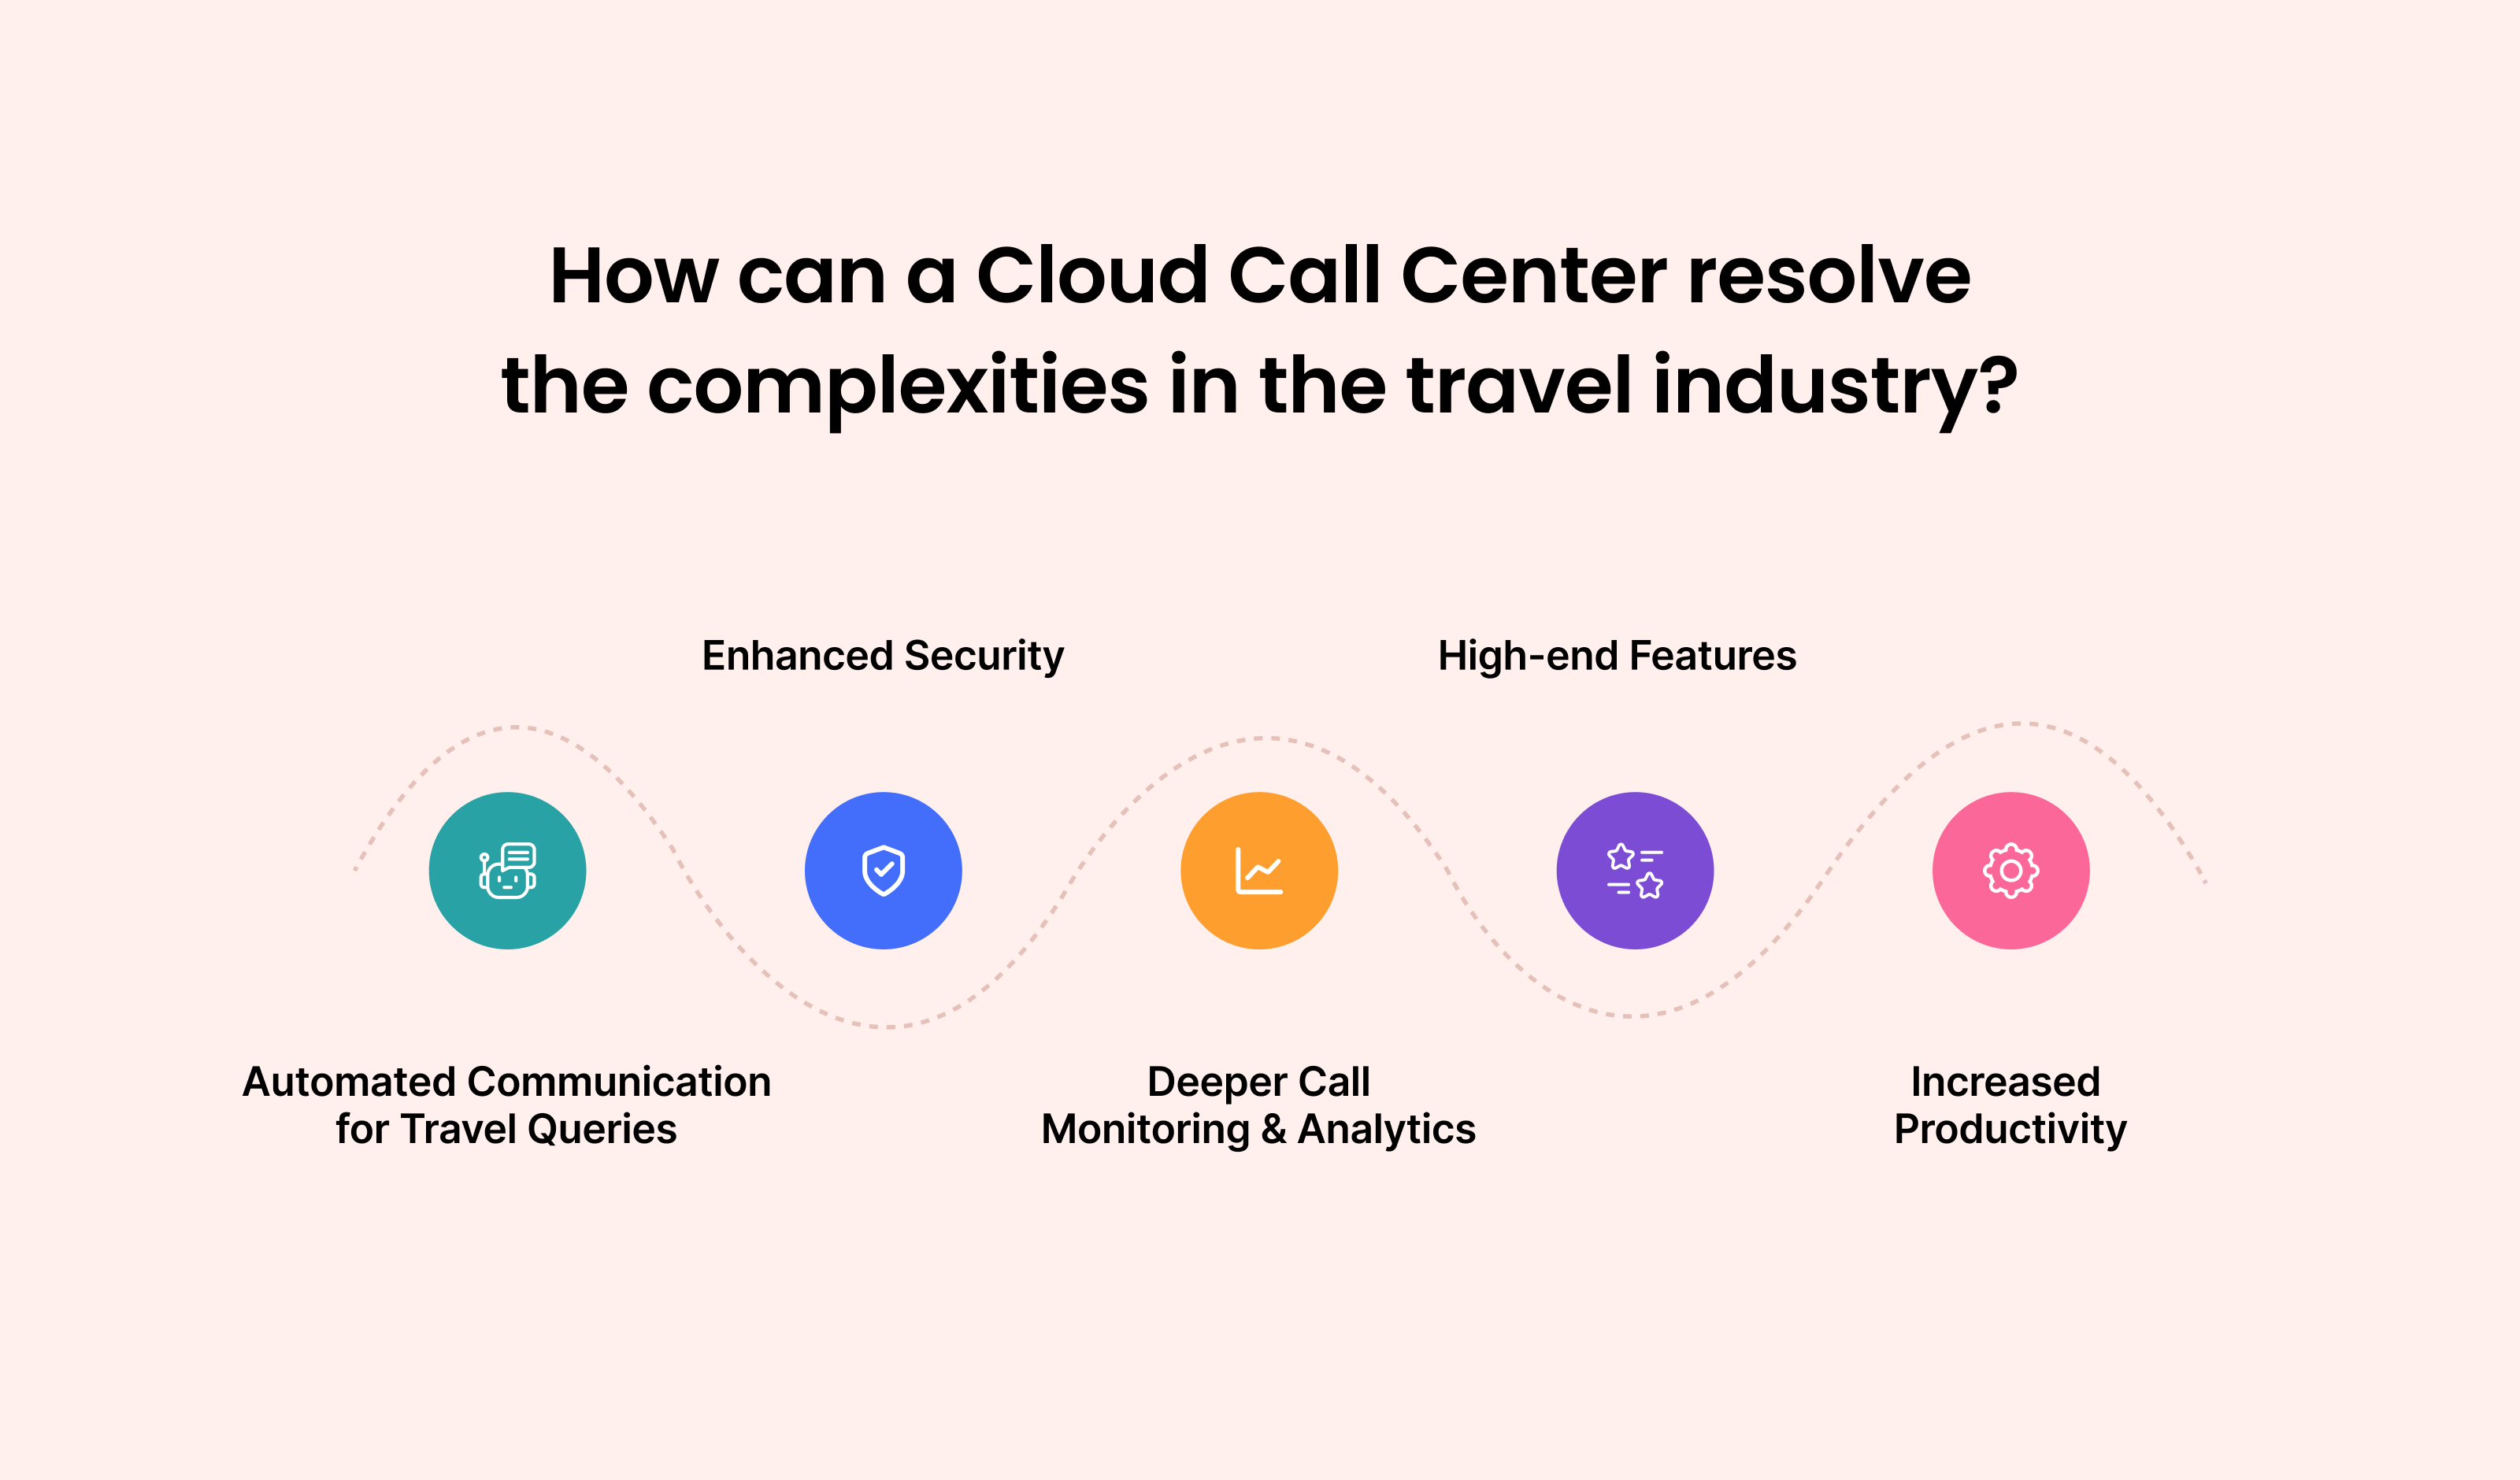 How can a Cloud Call Center resolve the complexities in the Travel Industry?